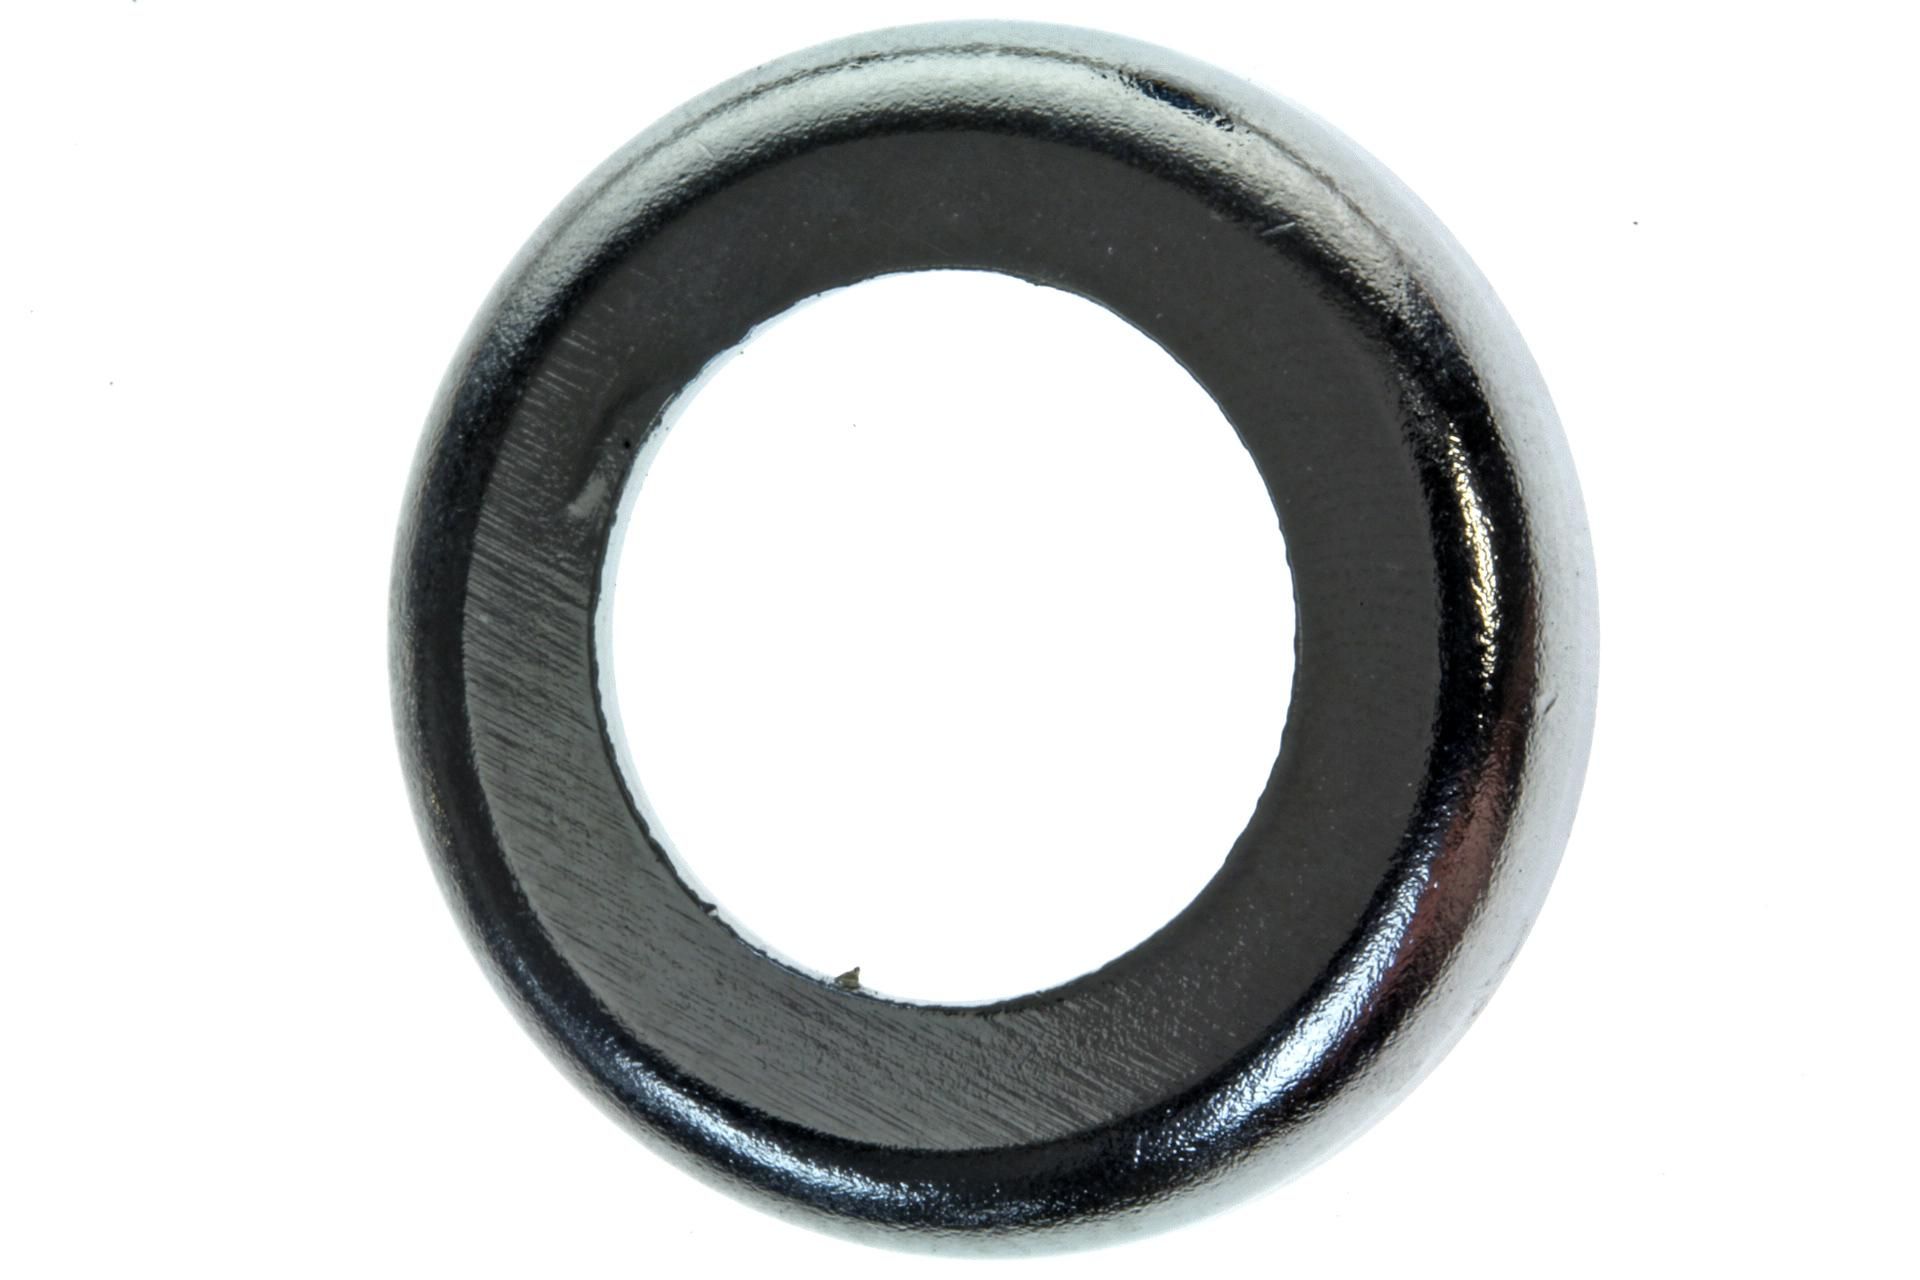 92022-1637 HEAD COVER BOLT WASHER